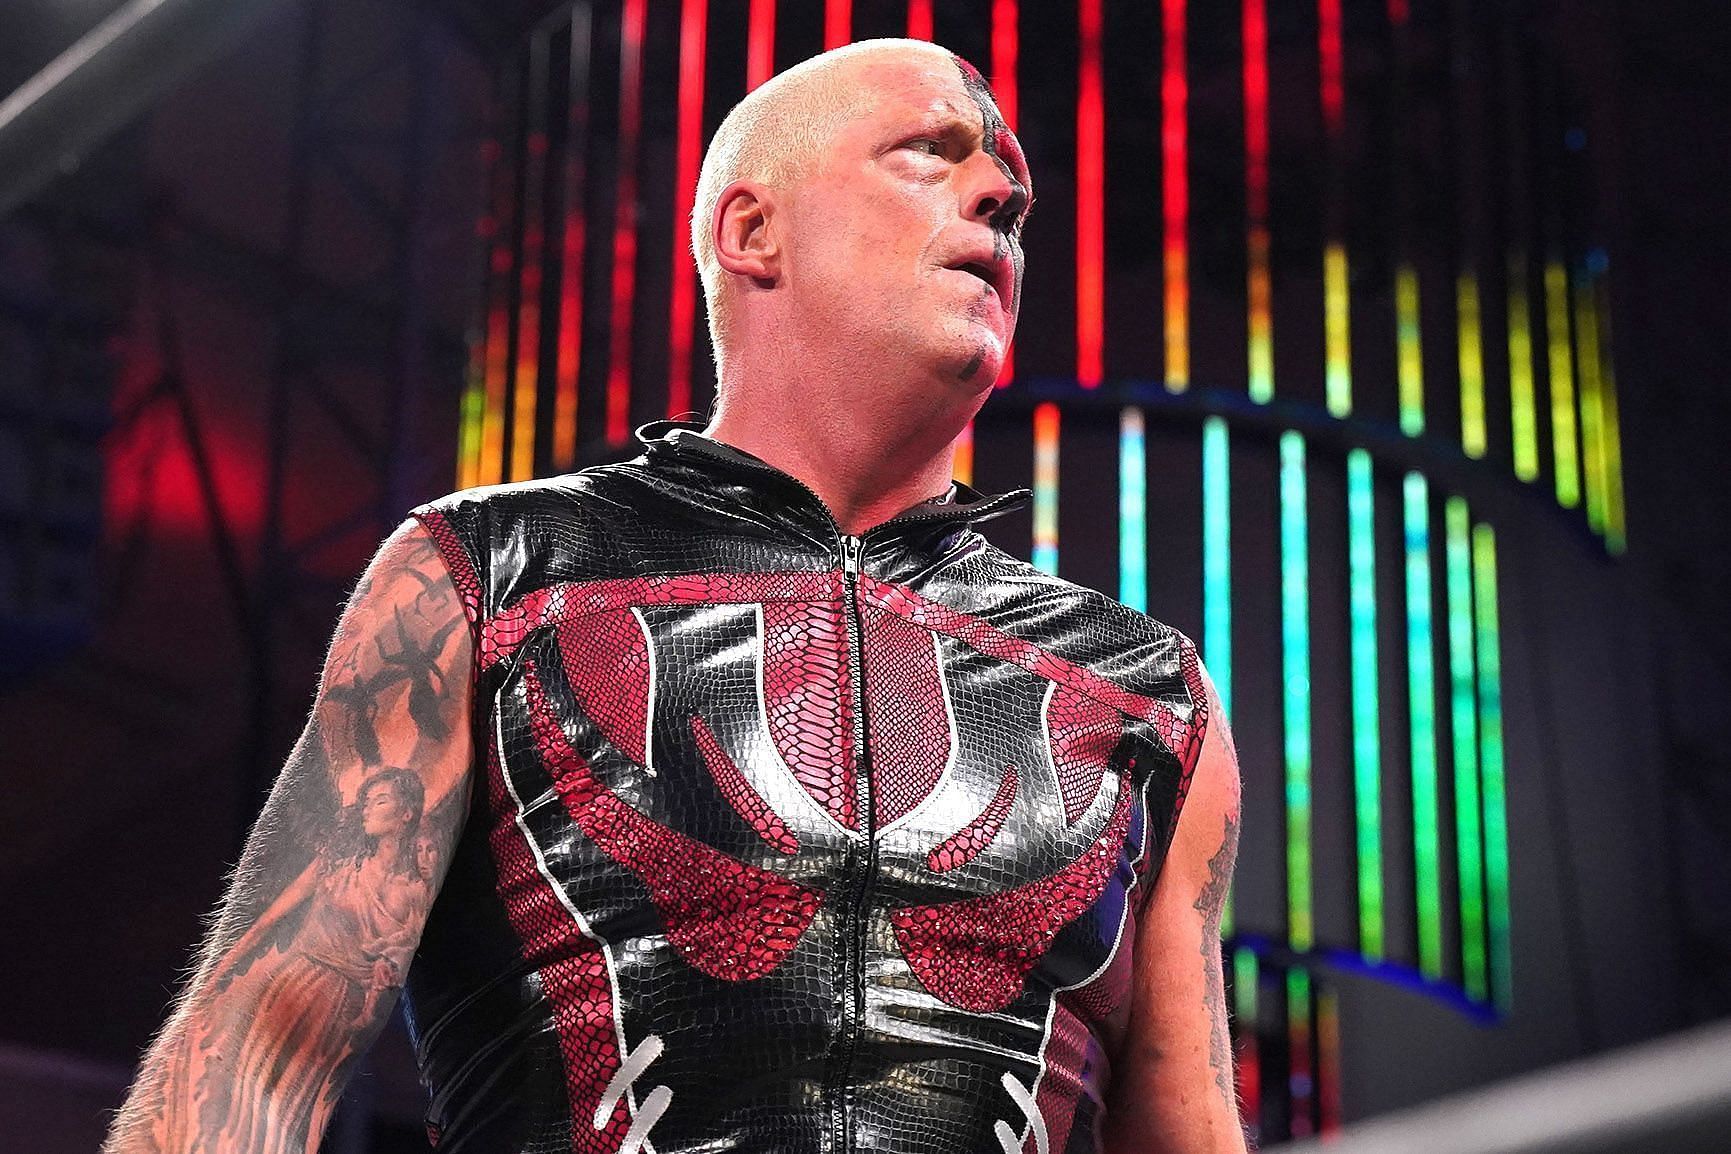 Dustin Rhodes has had a wrestling career spanning more than 30 years.